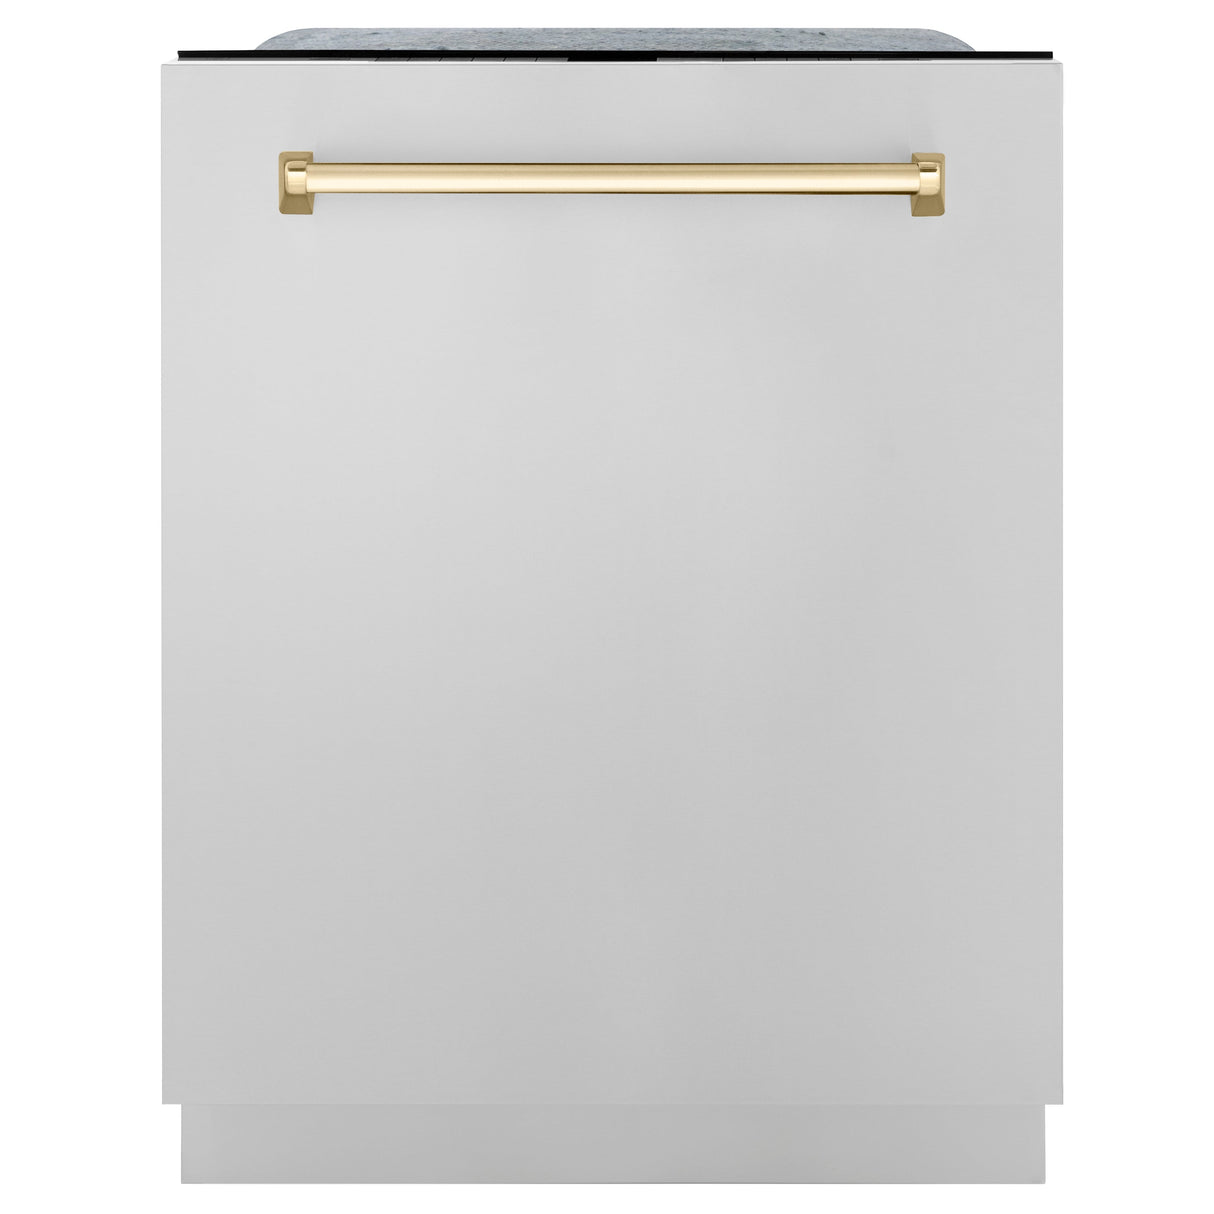 ZLINE 36 in. Autograph Edition Kitchen Package with Stainless Steel Dual Fuel Range, Range Hood, Dishwasher and Refrigeration Including External Water Dispenser with Polished Gold Accents (4AKPR-RARHDWM36-G)